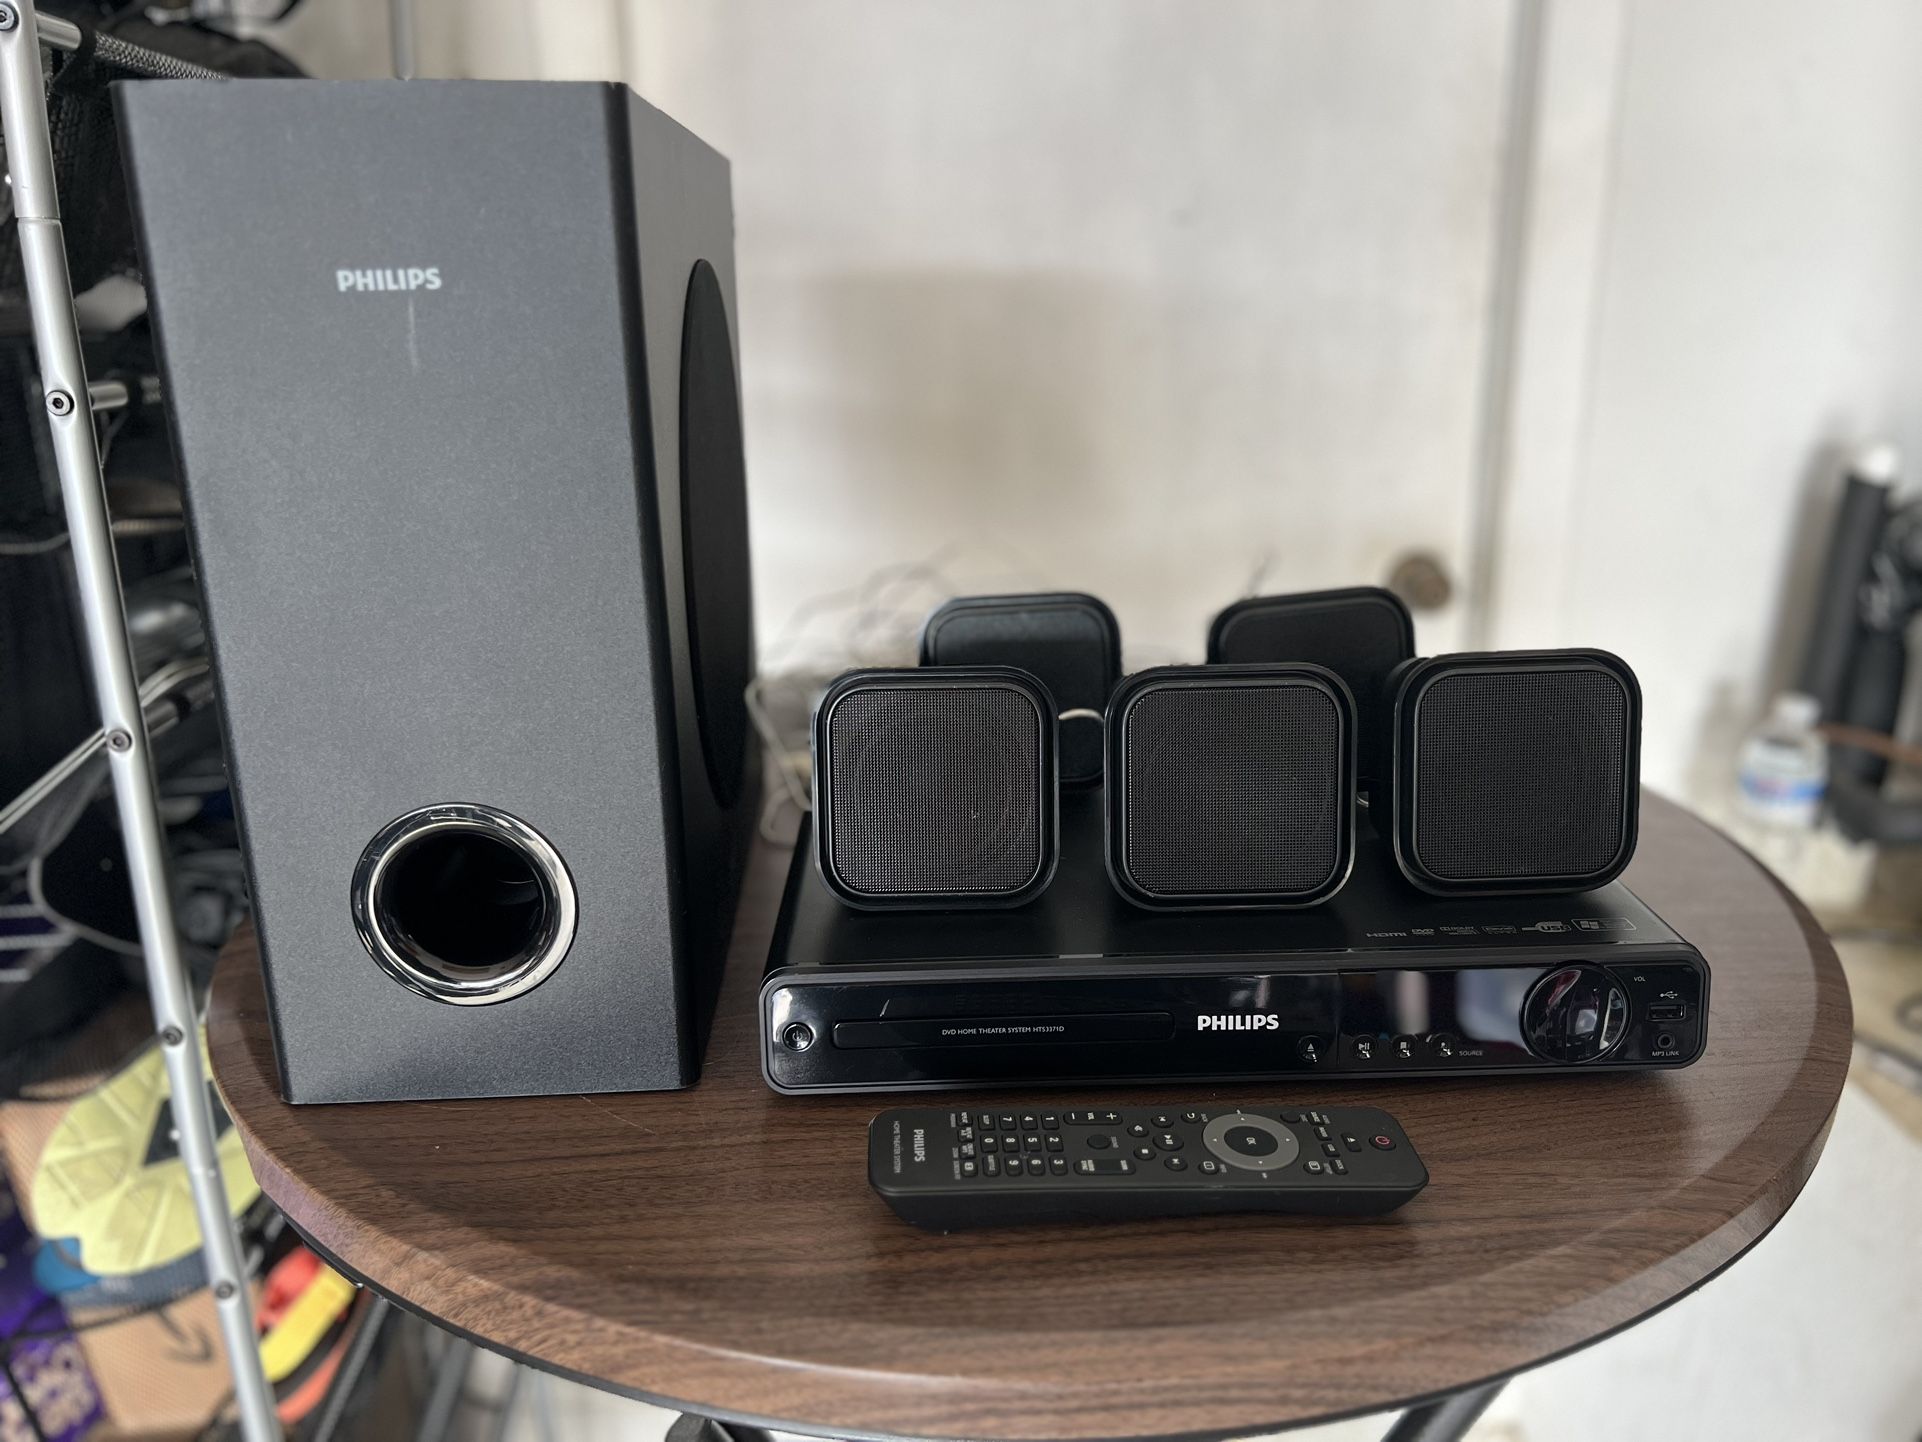 Phillips Home Theater System 5.1